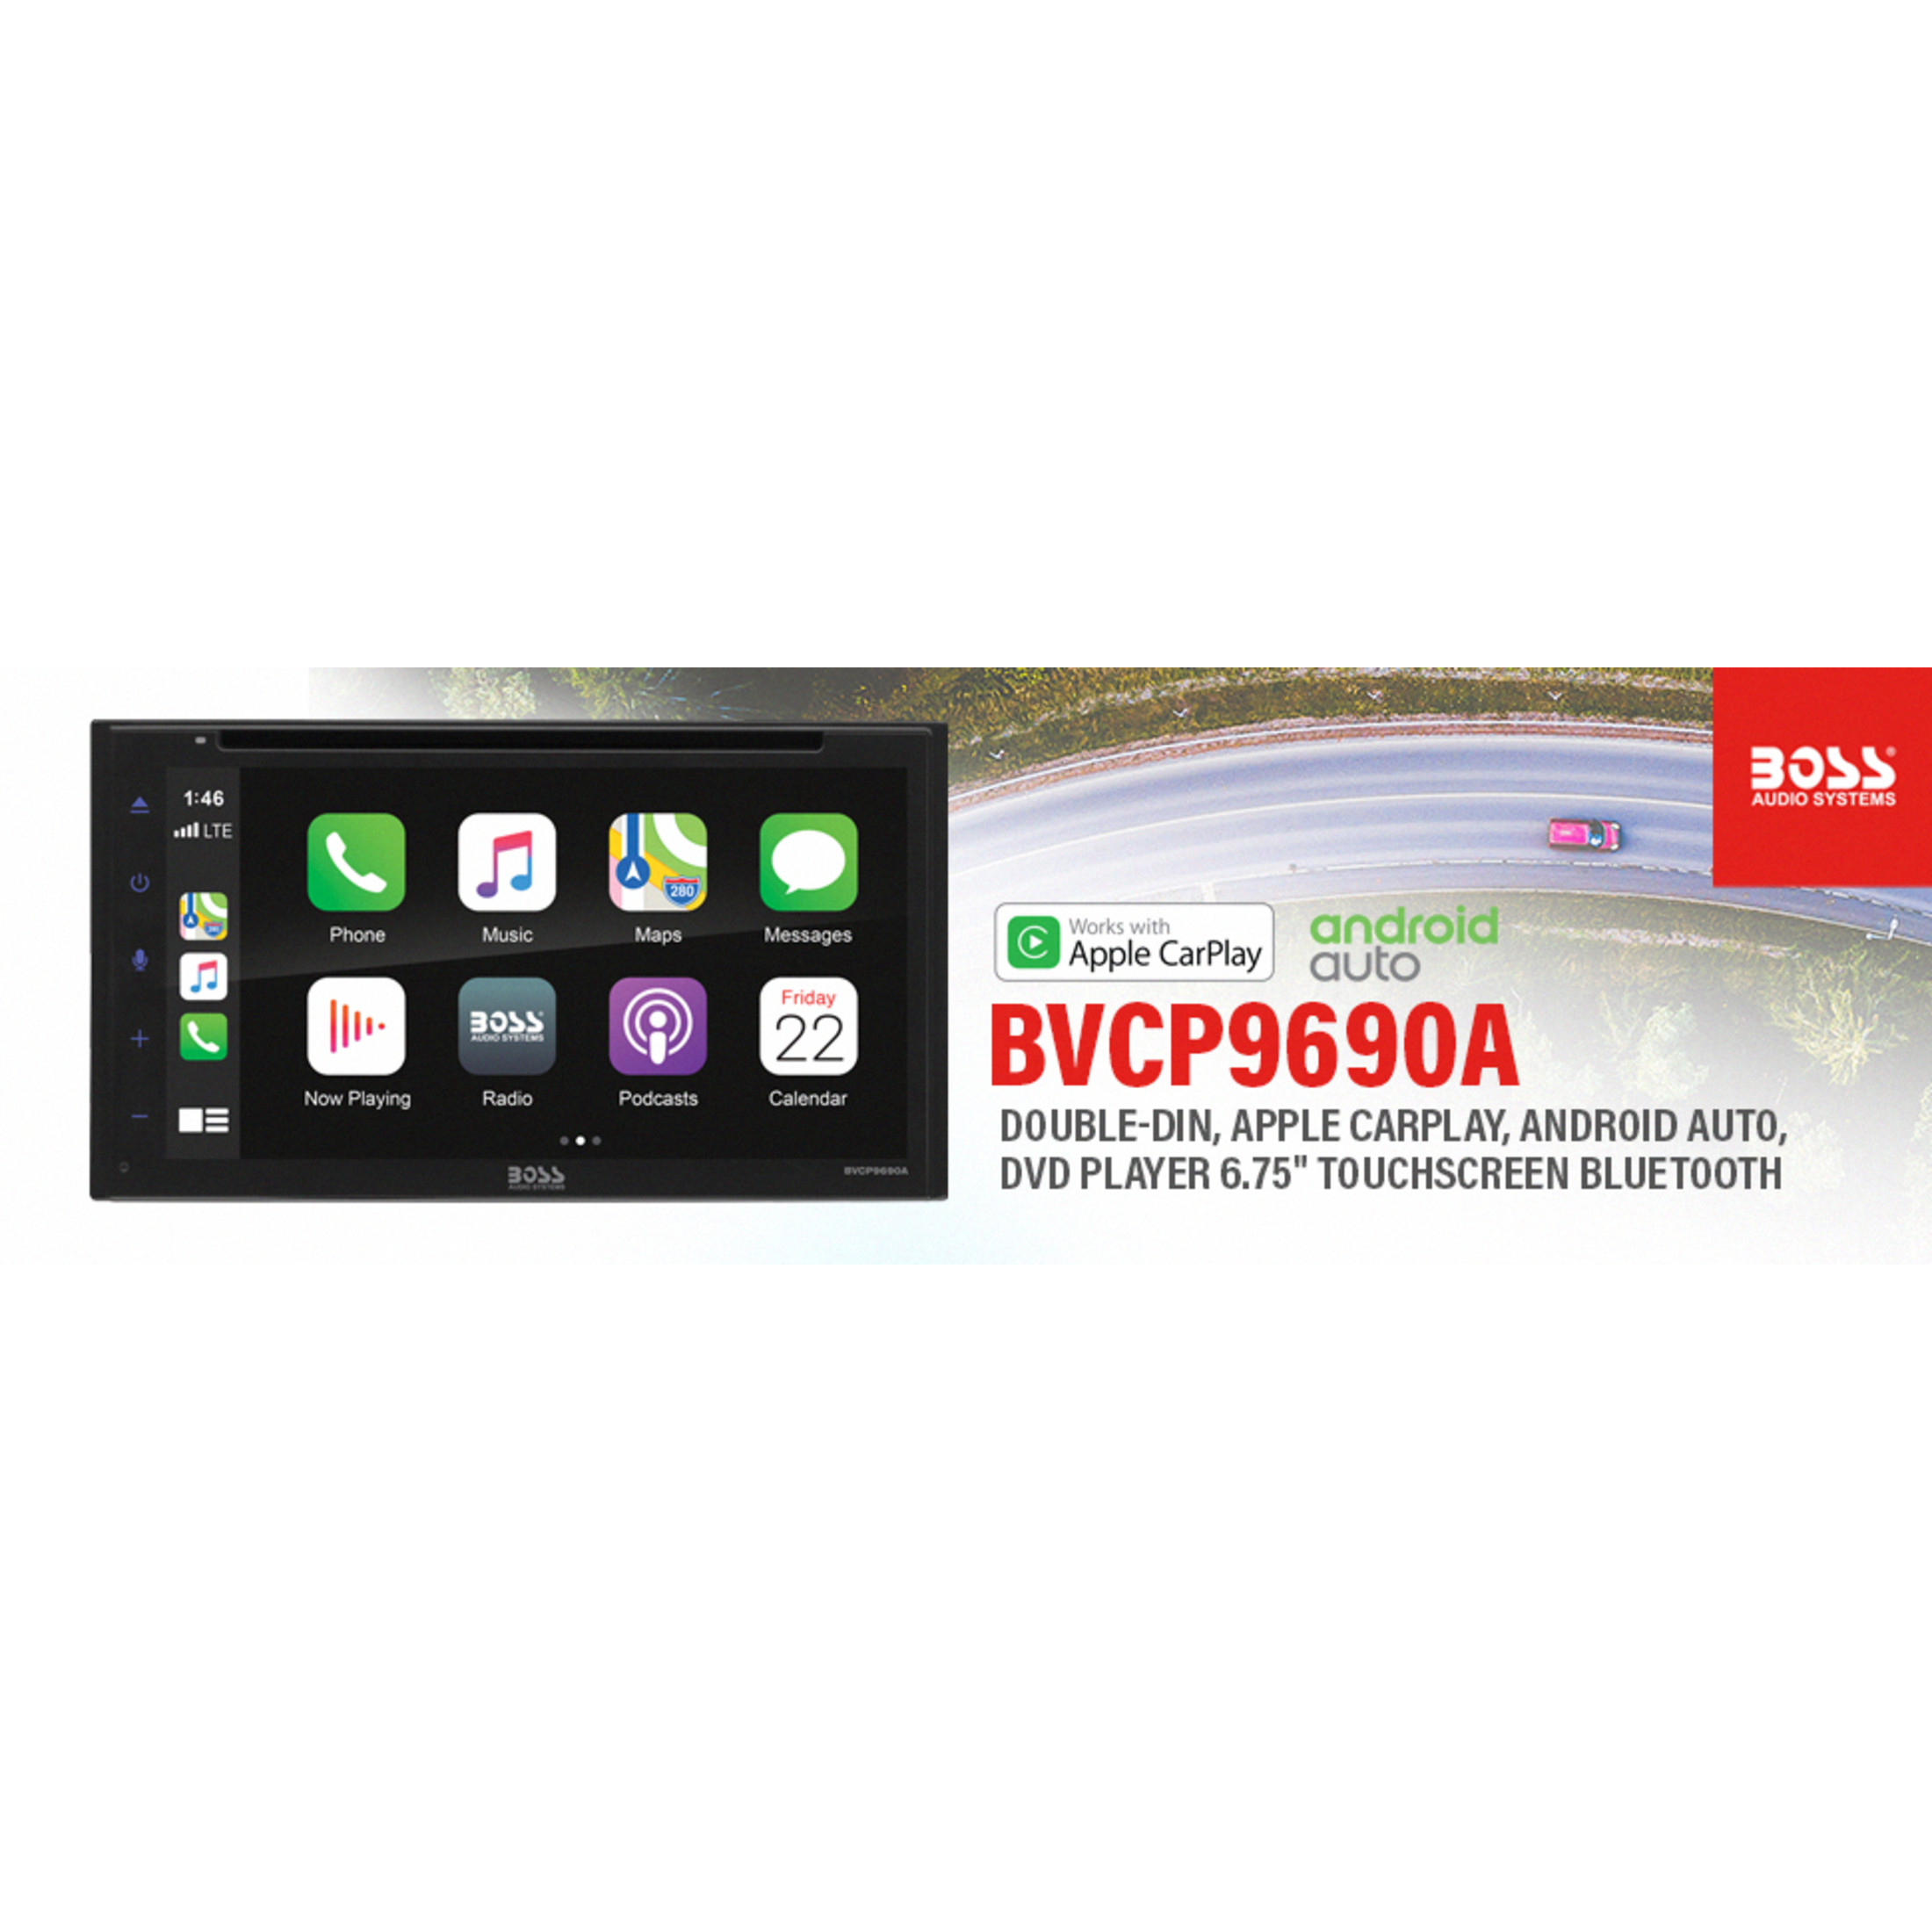 BOSS Audio Systems BVCP9690A Car Stereo - Apple CarPlay, Android Auto, Double Din, 6.75 Inch Touchscreen, Bluetooth, CD DVD Player, AM/FM Radio Receiver, Wireless Remote Control, USB - image 4 of 13